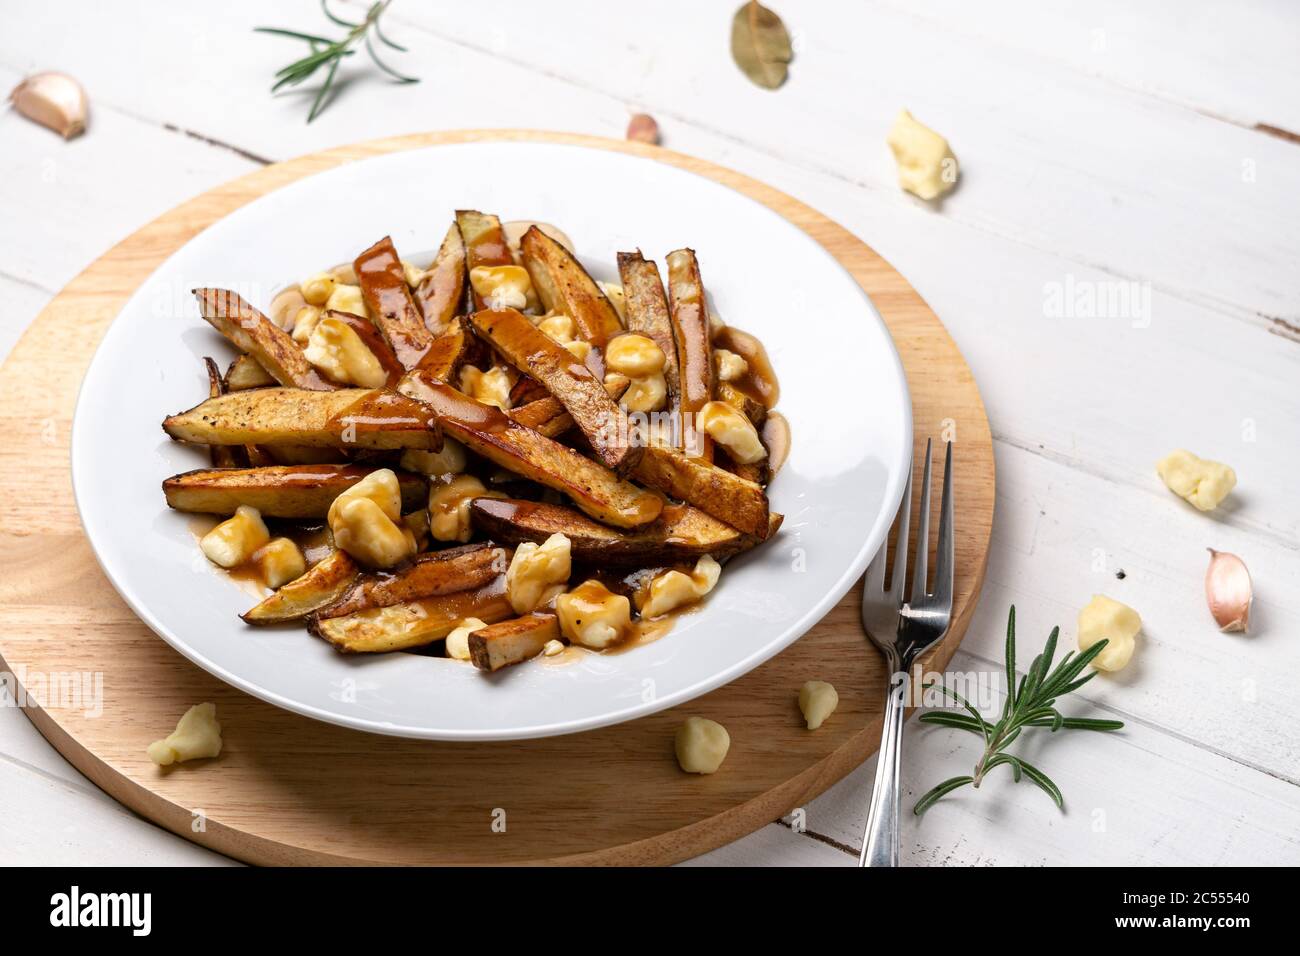 Montreal Poutine gravy fries dish. A classic fast food cuisine dish from Quebec. This canadian comfort food is made with french fries mixed with tasty Stock Photo